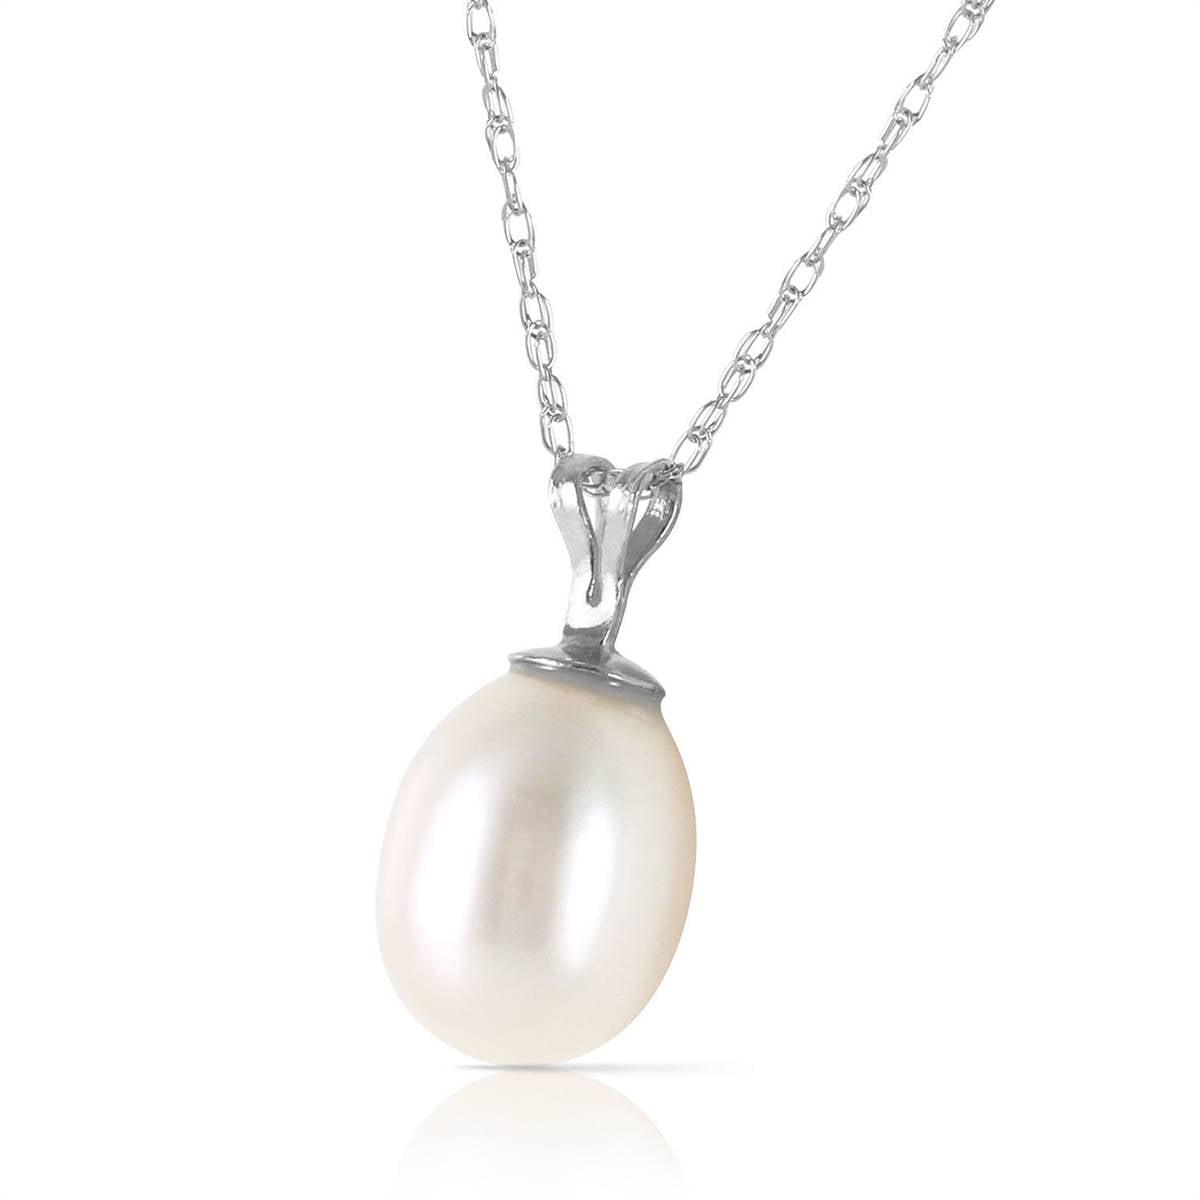 4 Carat 14K Solid White Gold Perseverance Pays Pearl Necklace